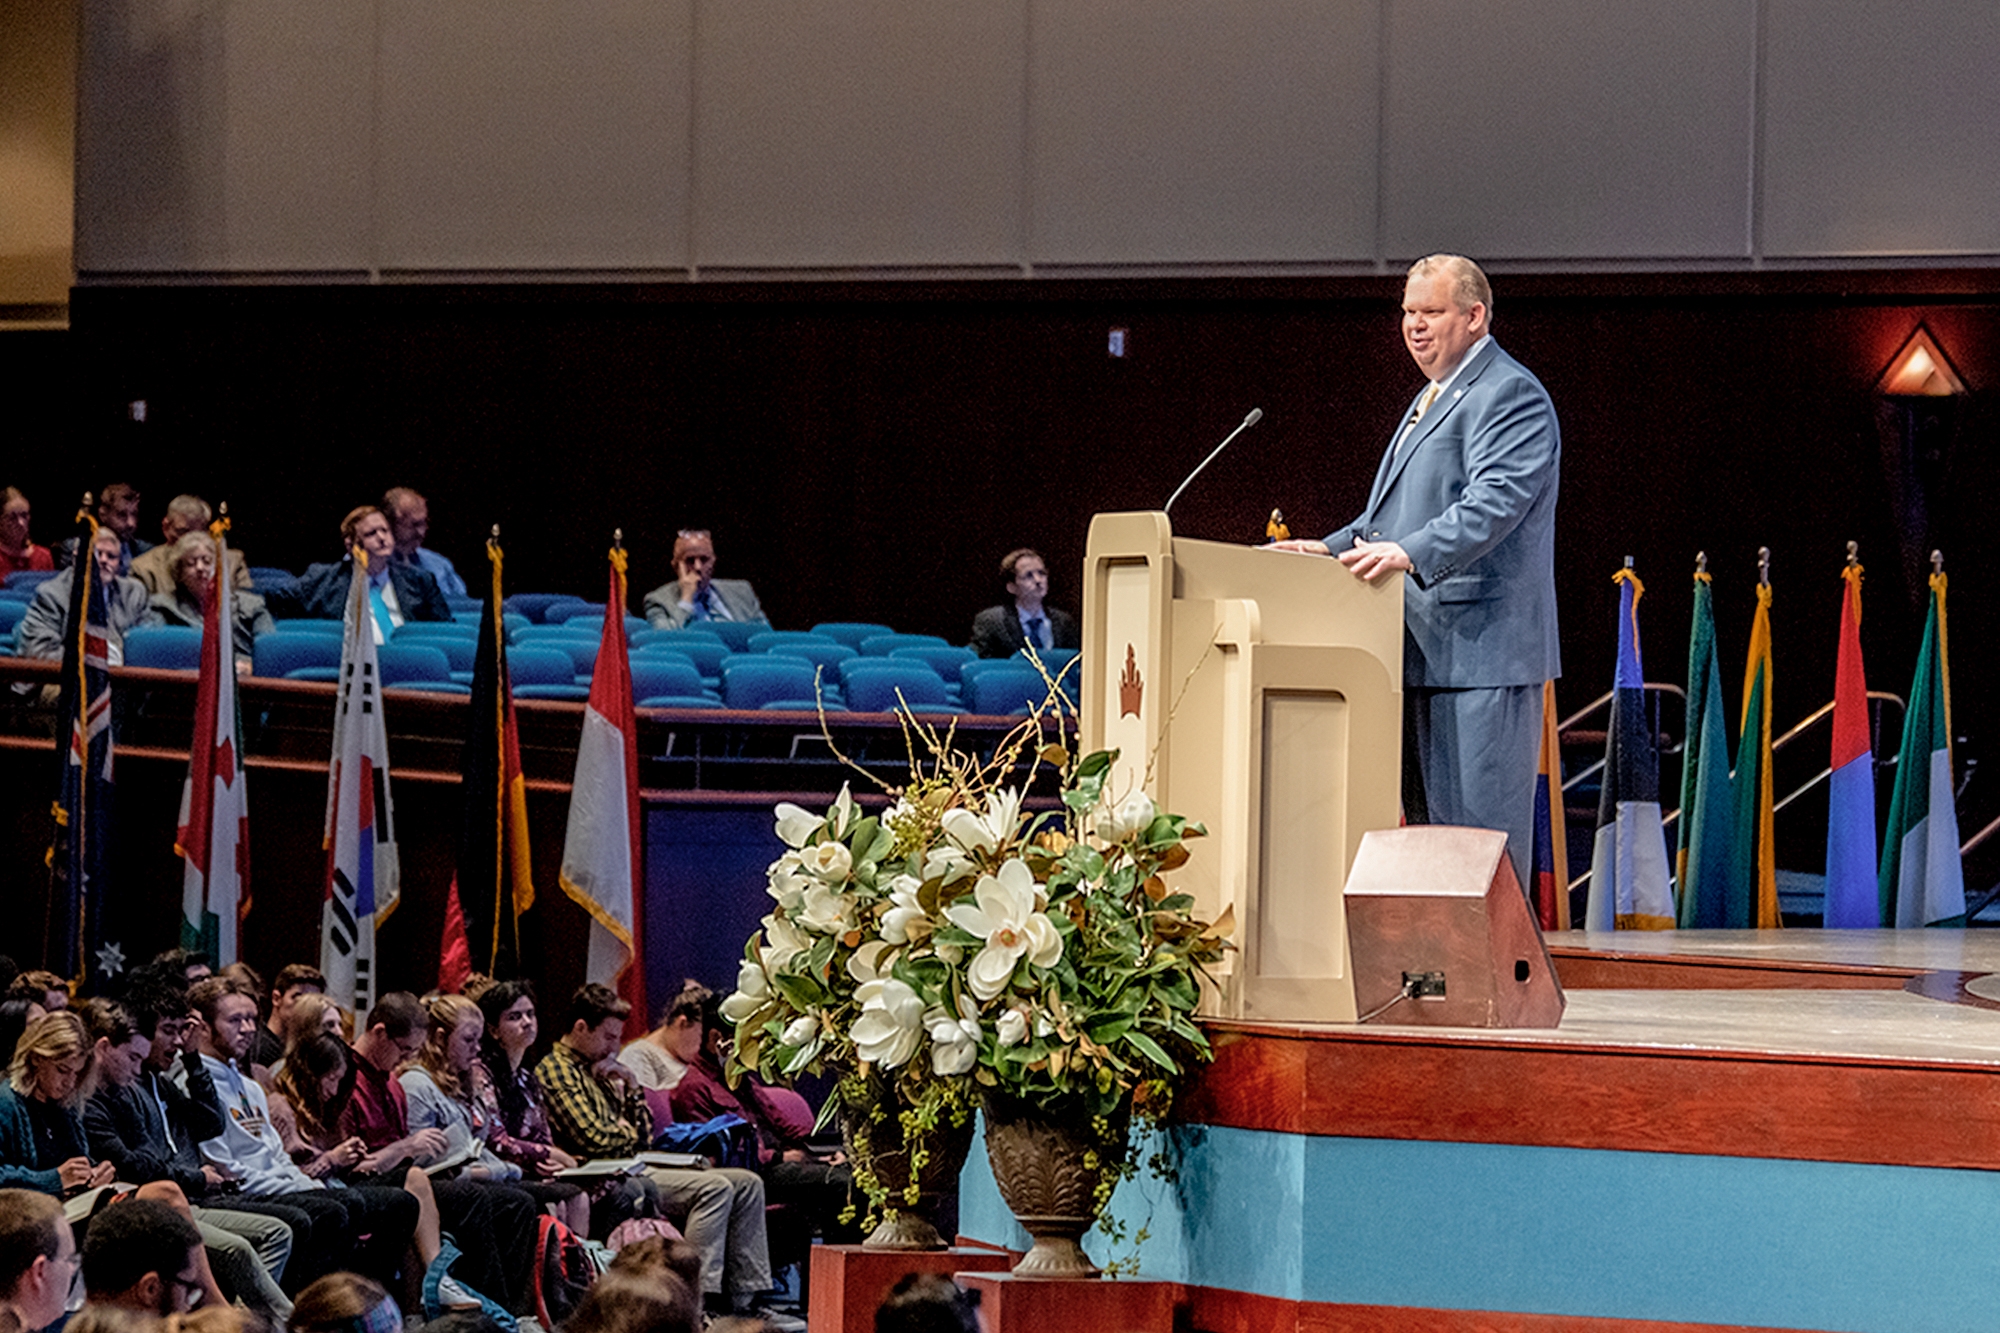 Bill Paterson preaching during Missions Conference.